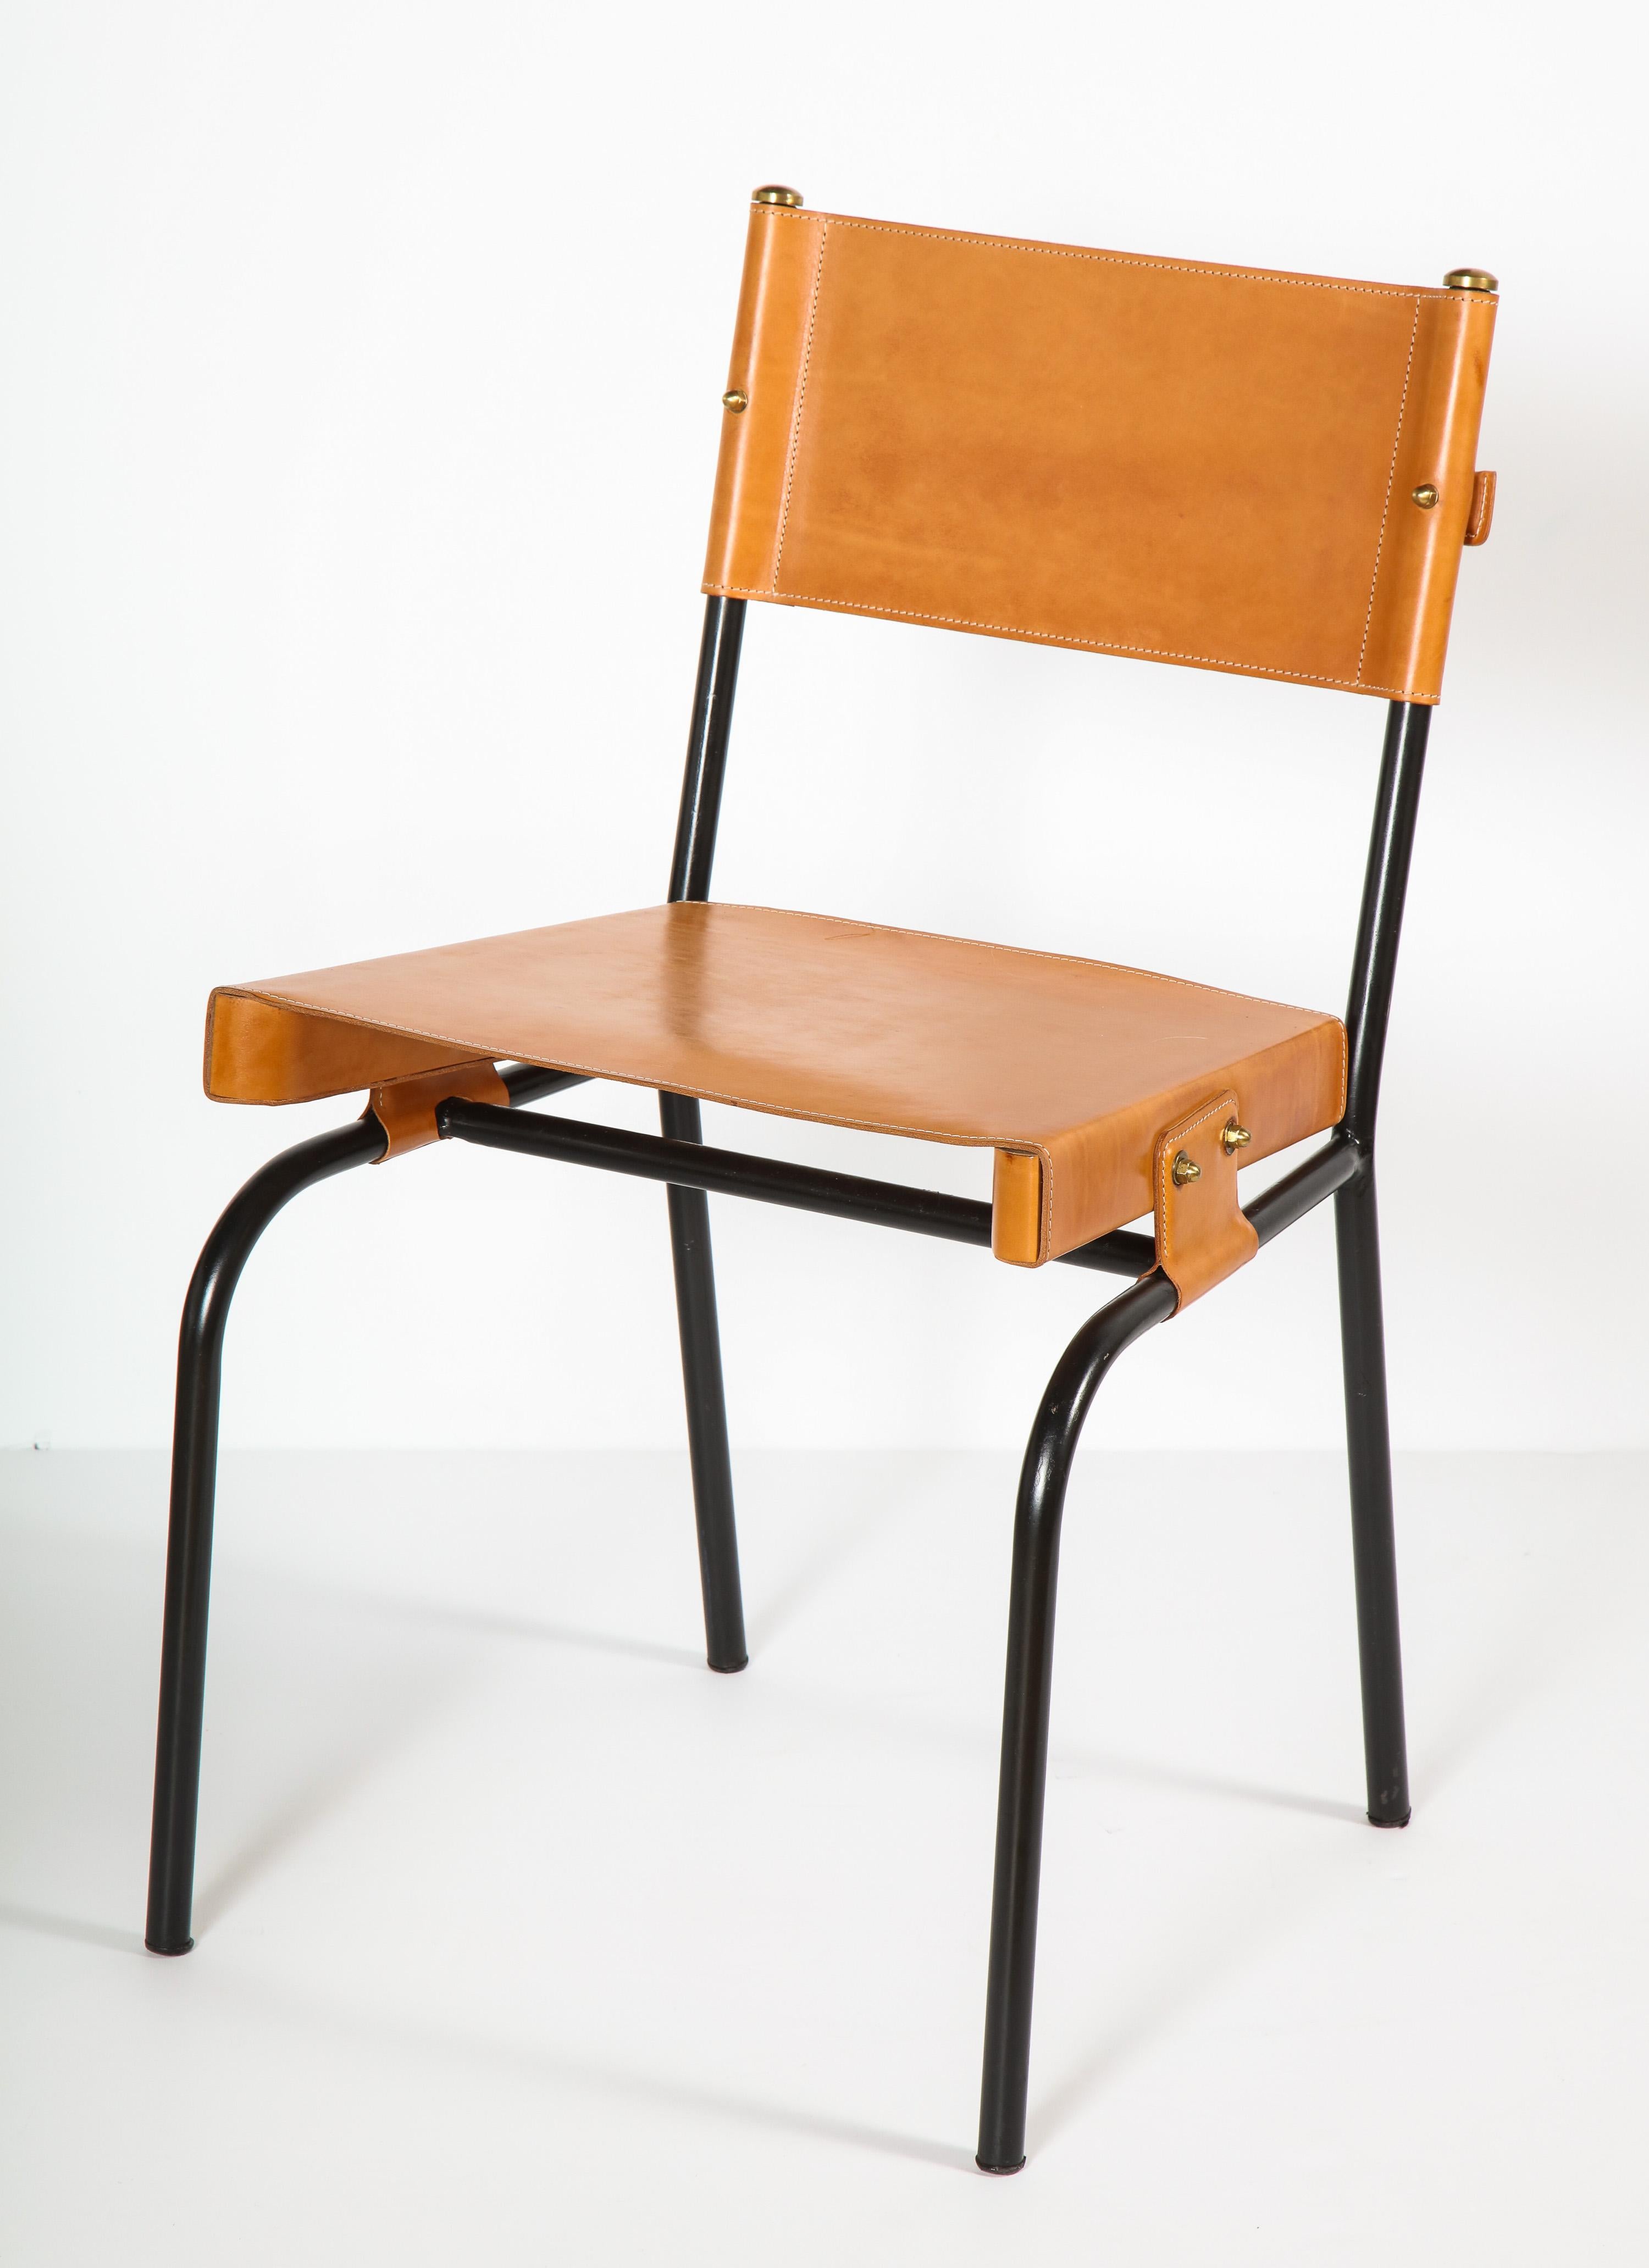 Exceptional set of Jacques Adnet dining chair with period correct leather restoration. Sold as a set or pair only.